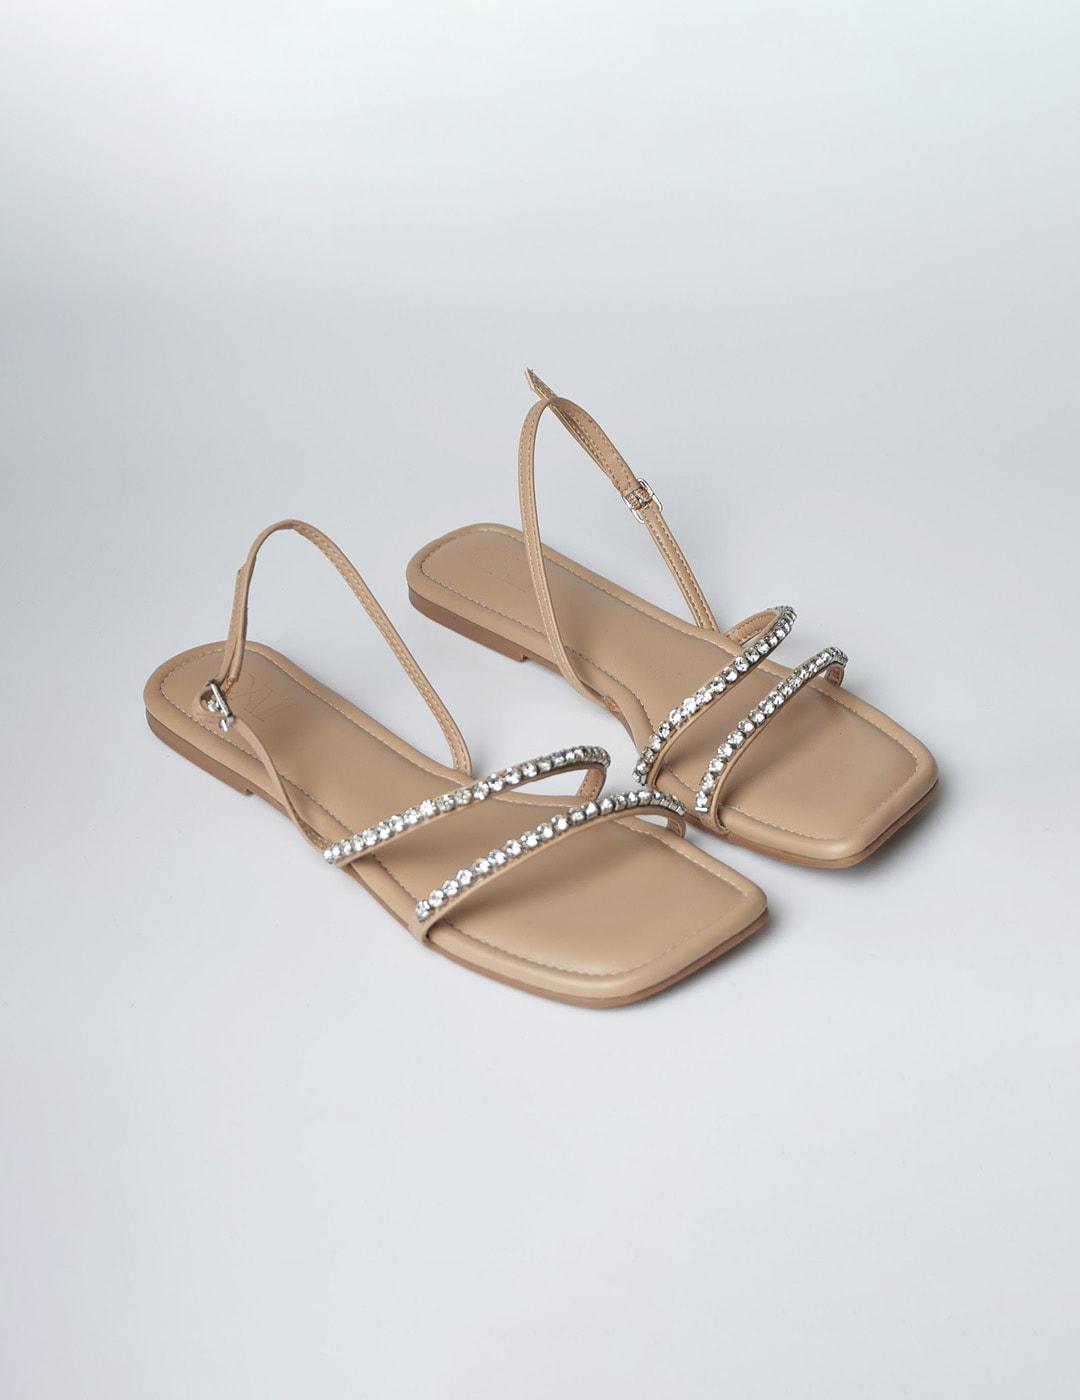 cai embellished open toe flats with buckles